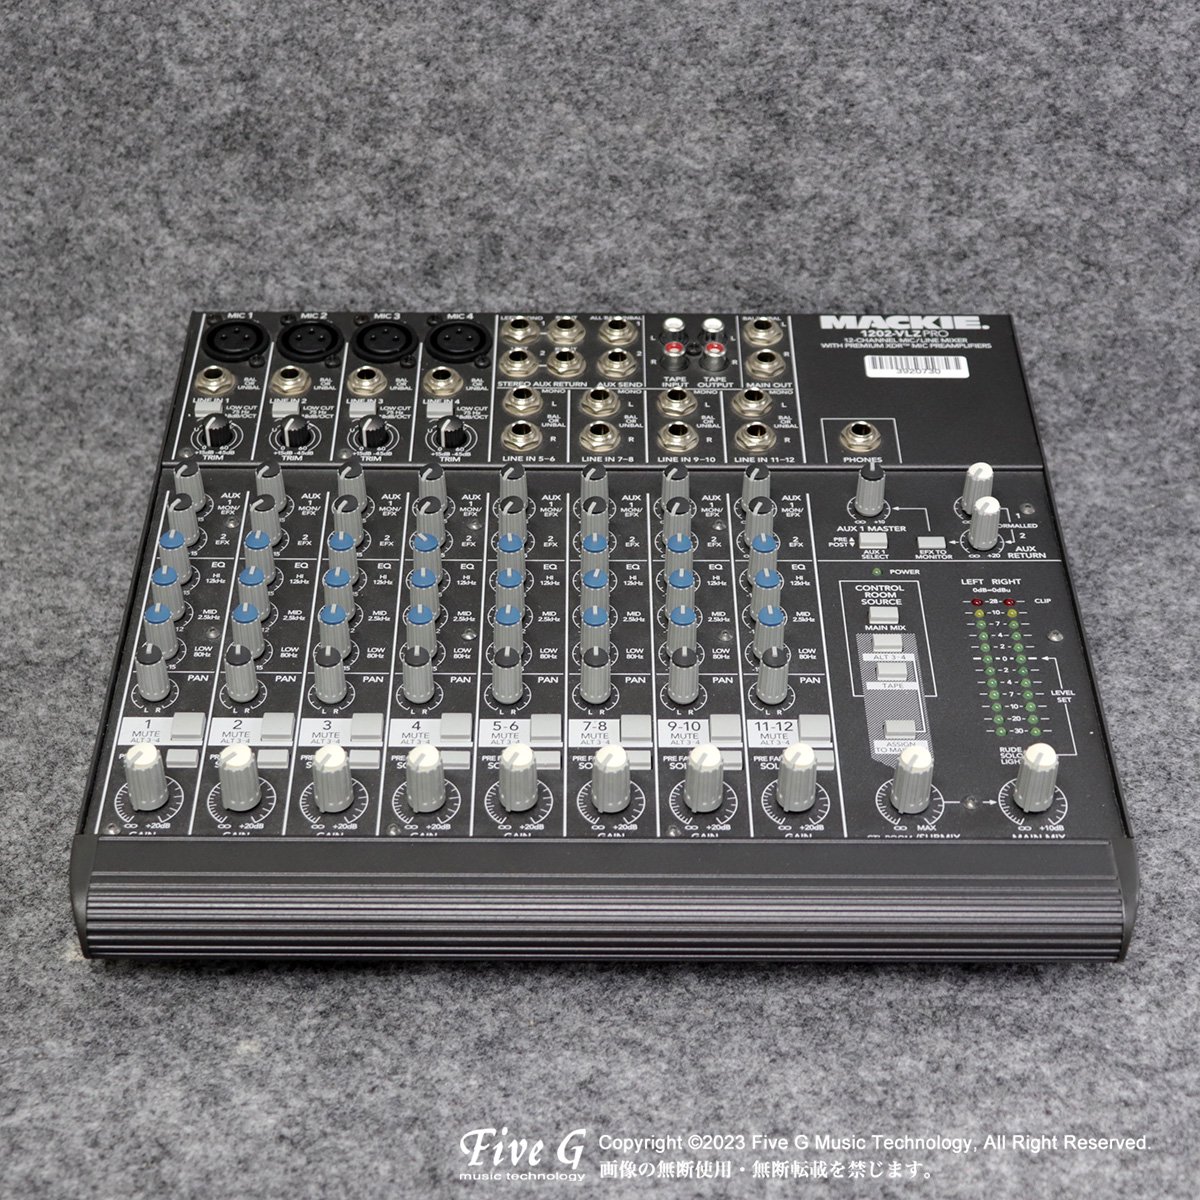 MACKIE | 1202-VLZ PRO | 中古 - Used - その他 | Five G music technology